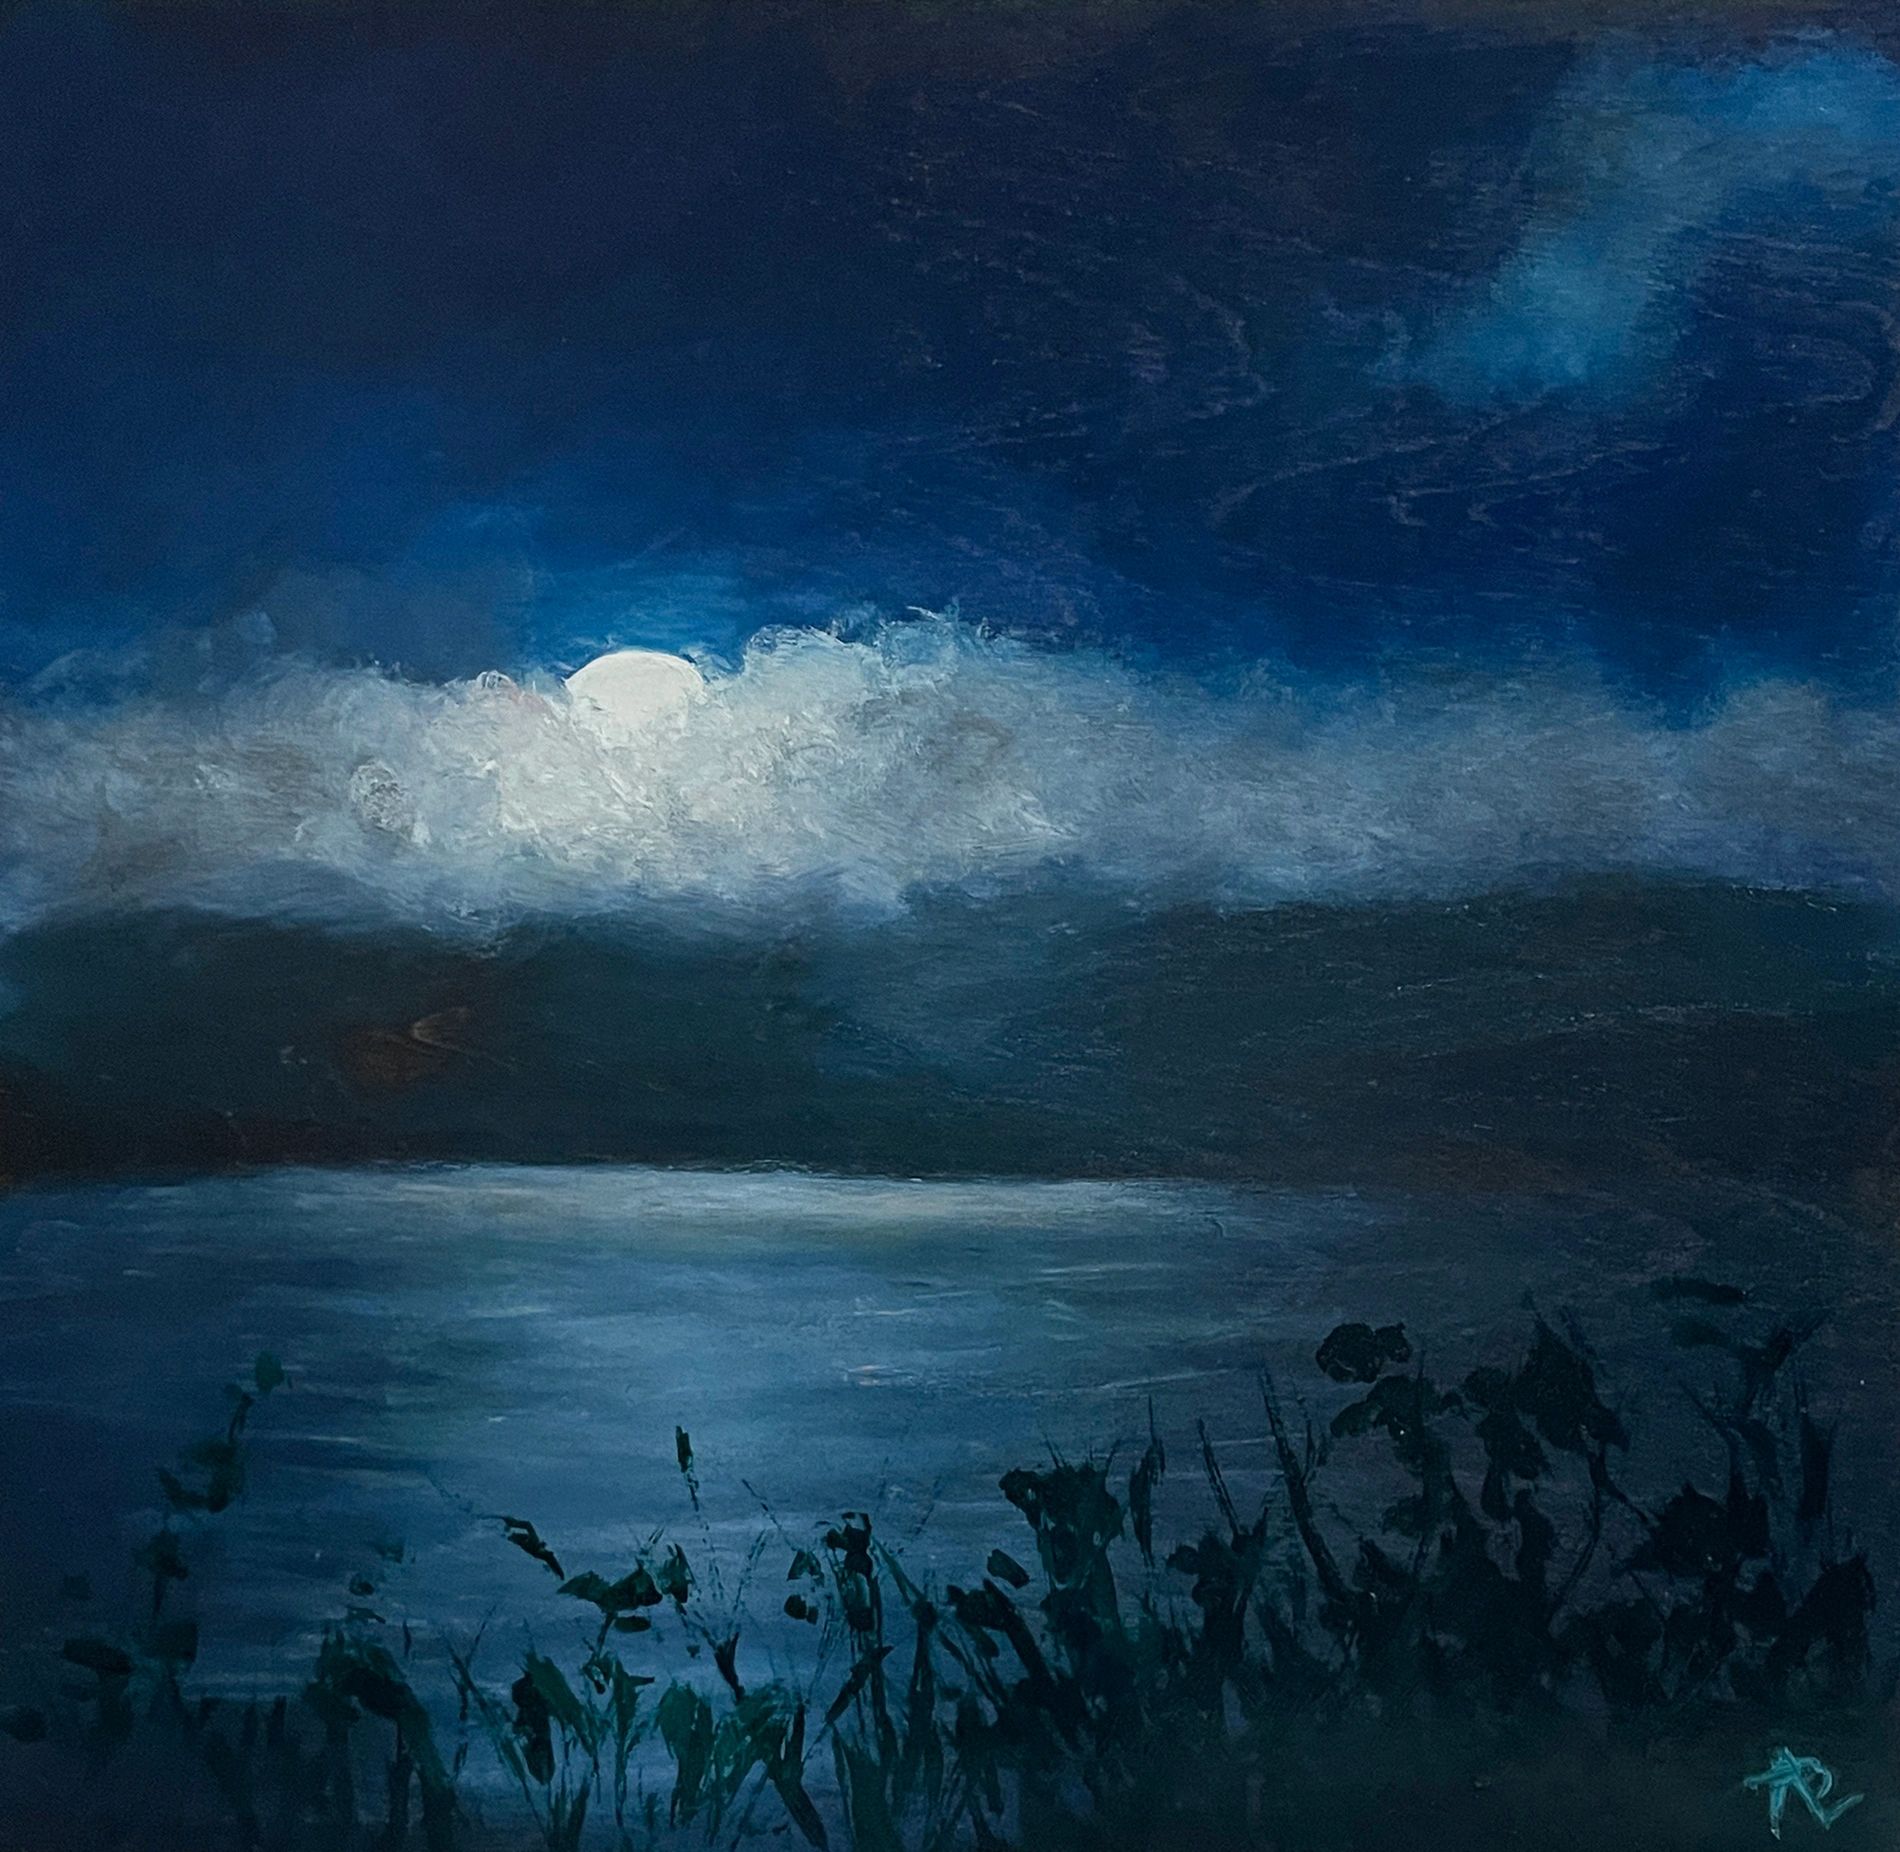 An evening view of the moon above a cloudy sky reflecting light on the bay, painted on cradled wood.